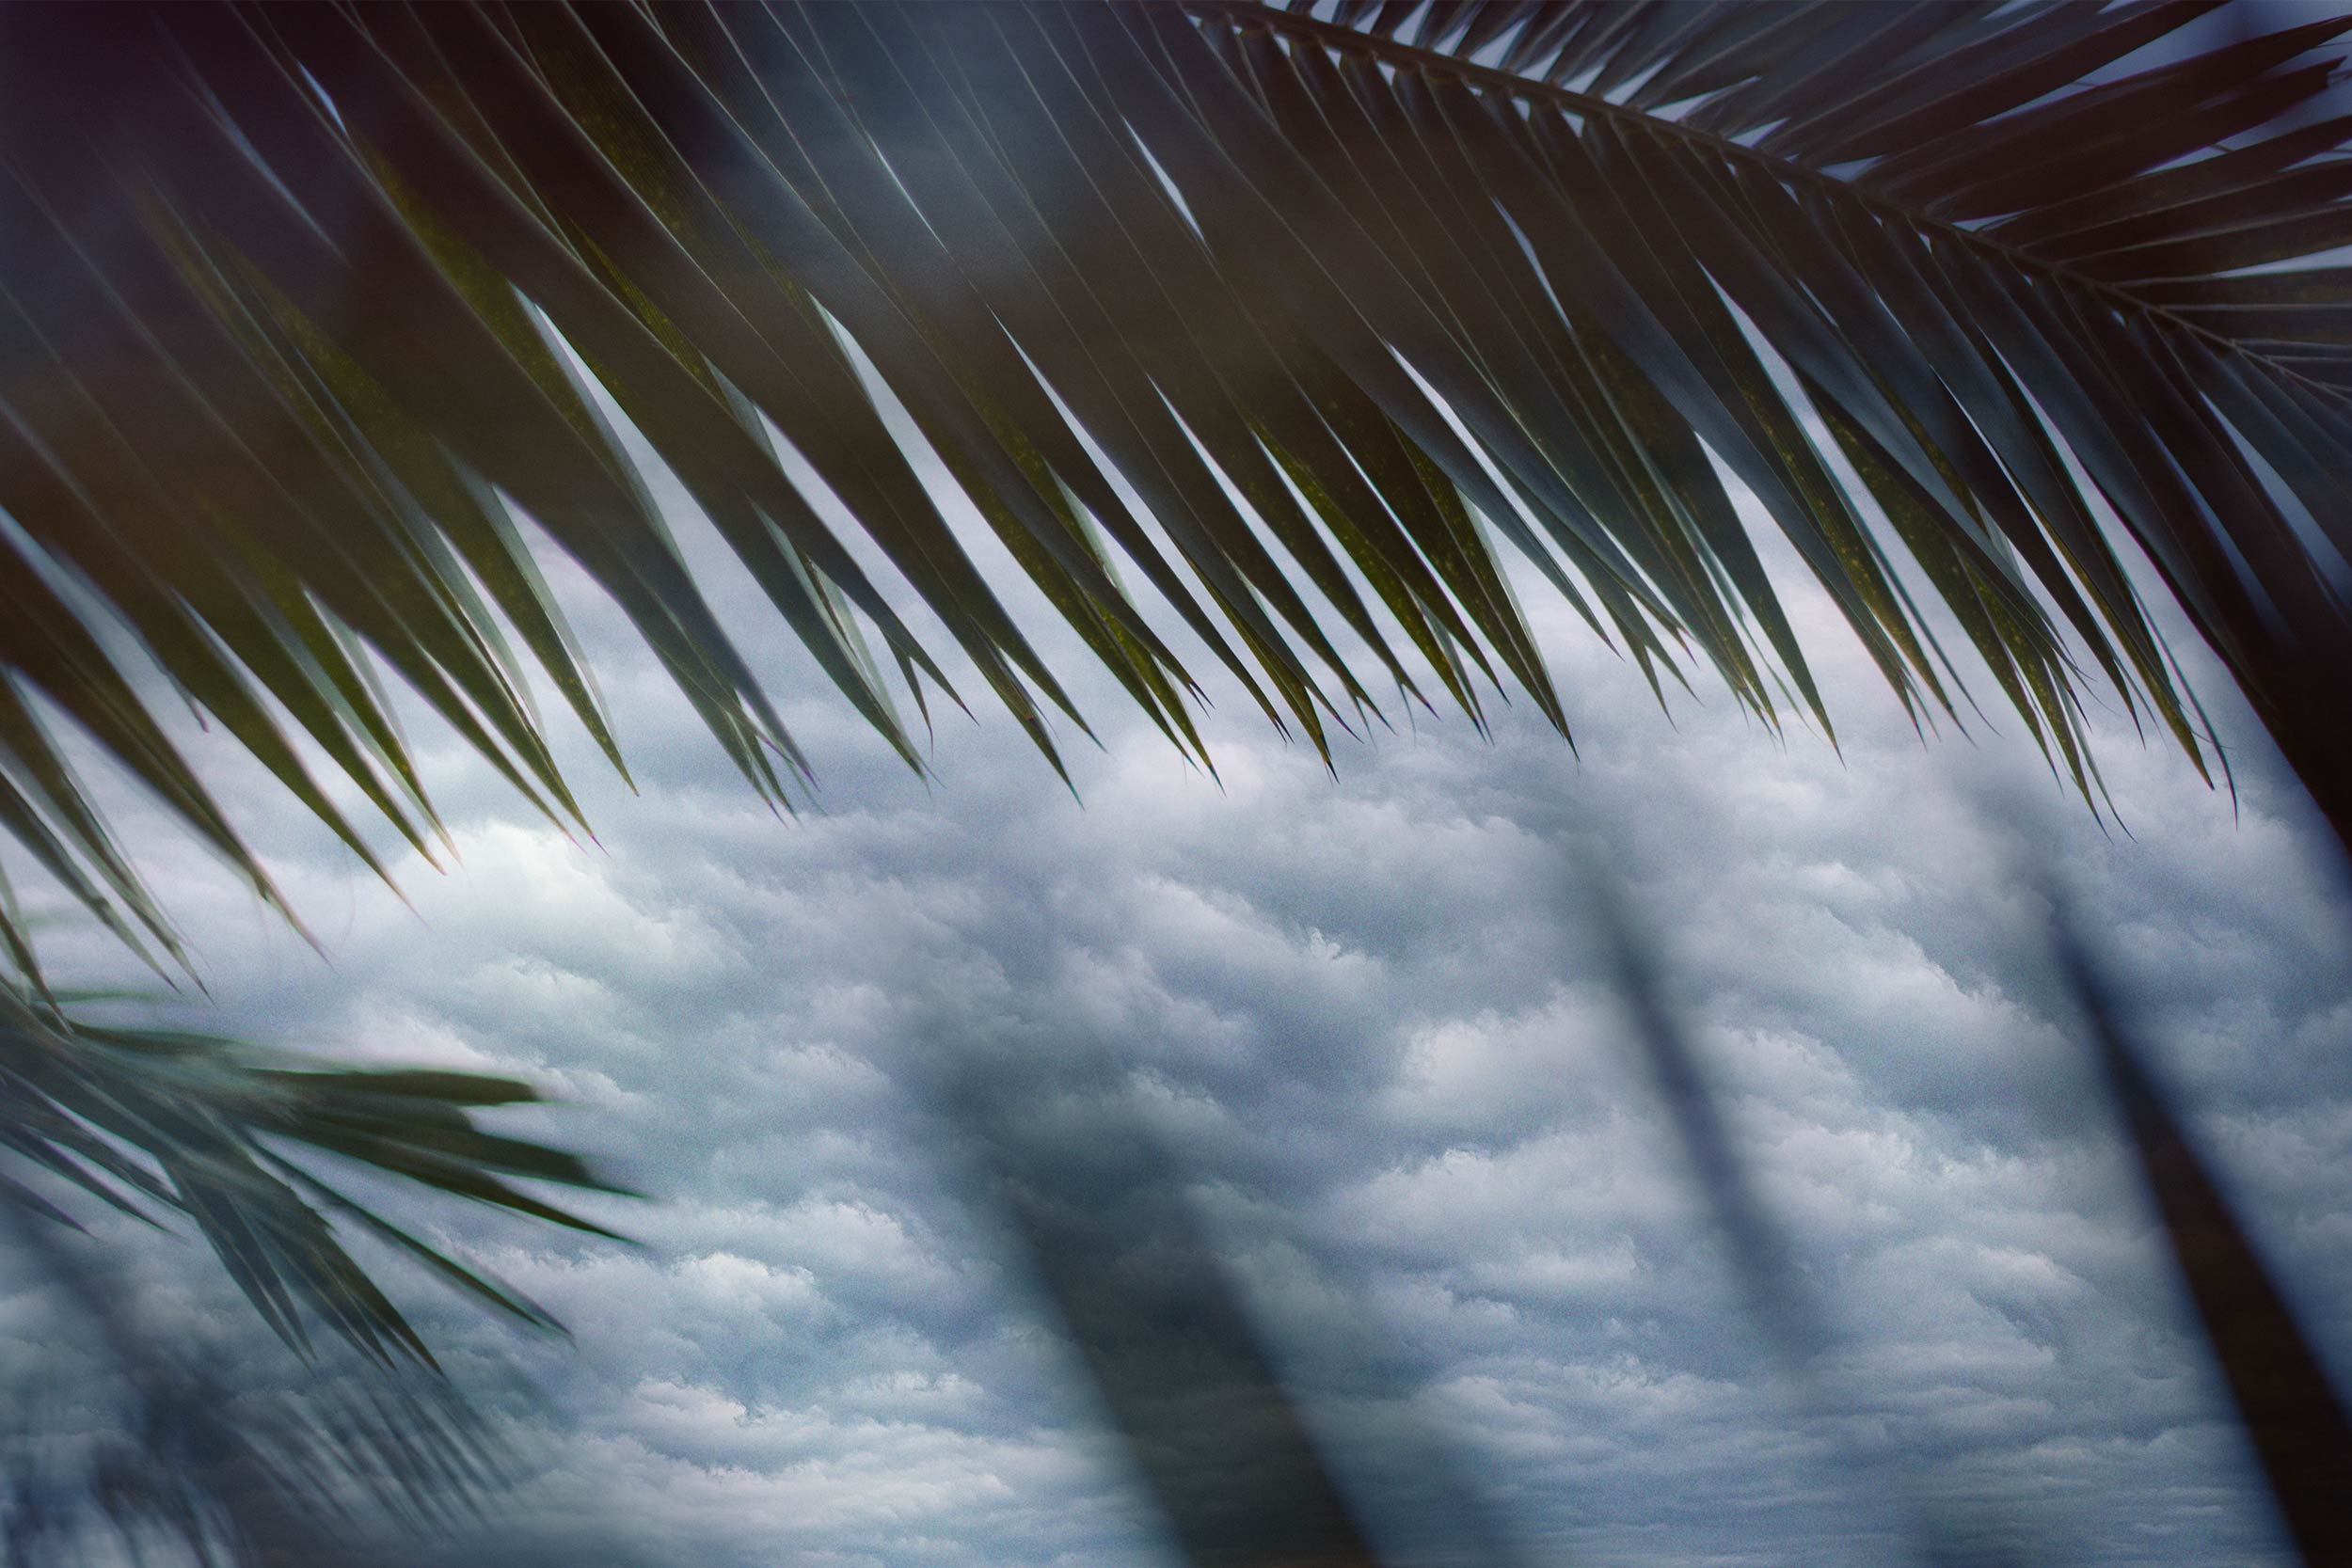 Palm branch with clouds seen through the branches